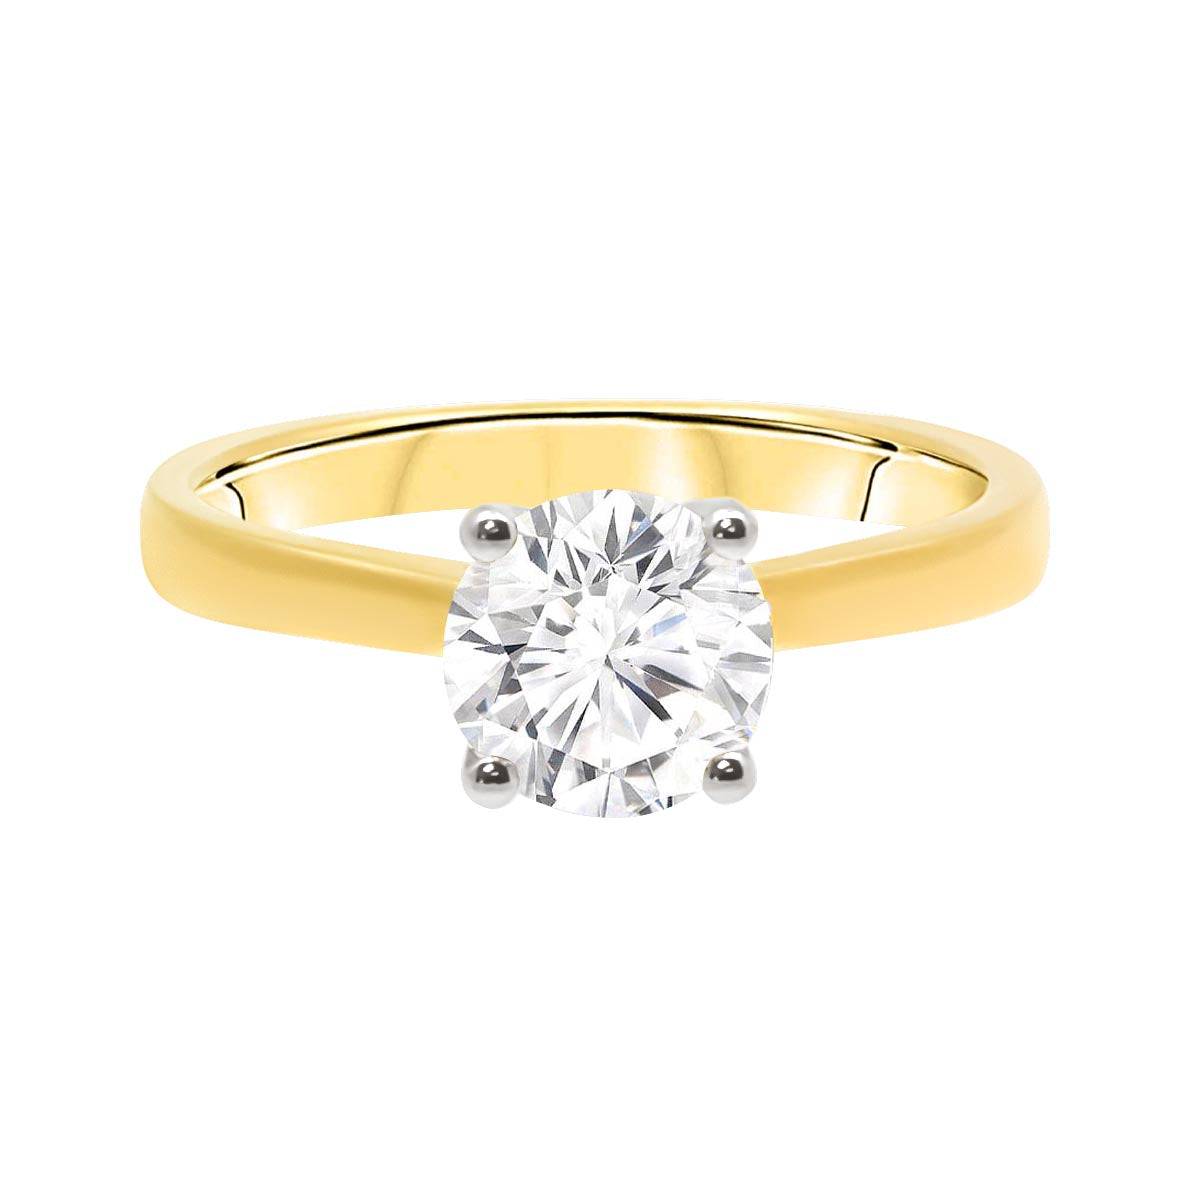 Round Solitaire With Criss Cross Shank in yellow gold